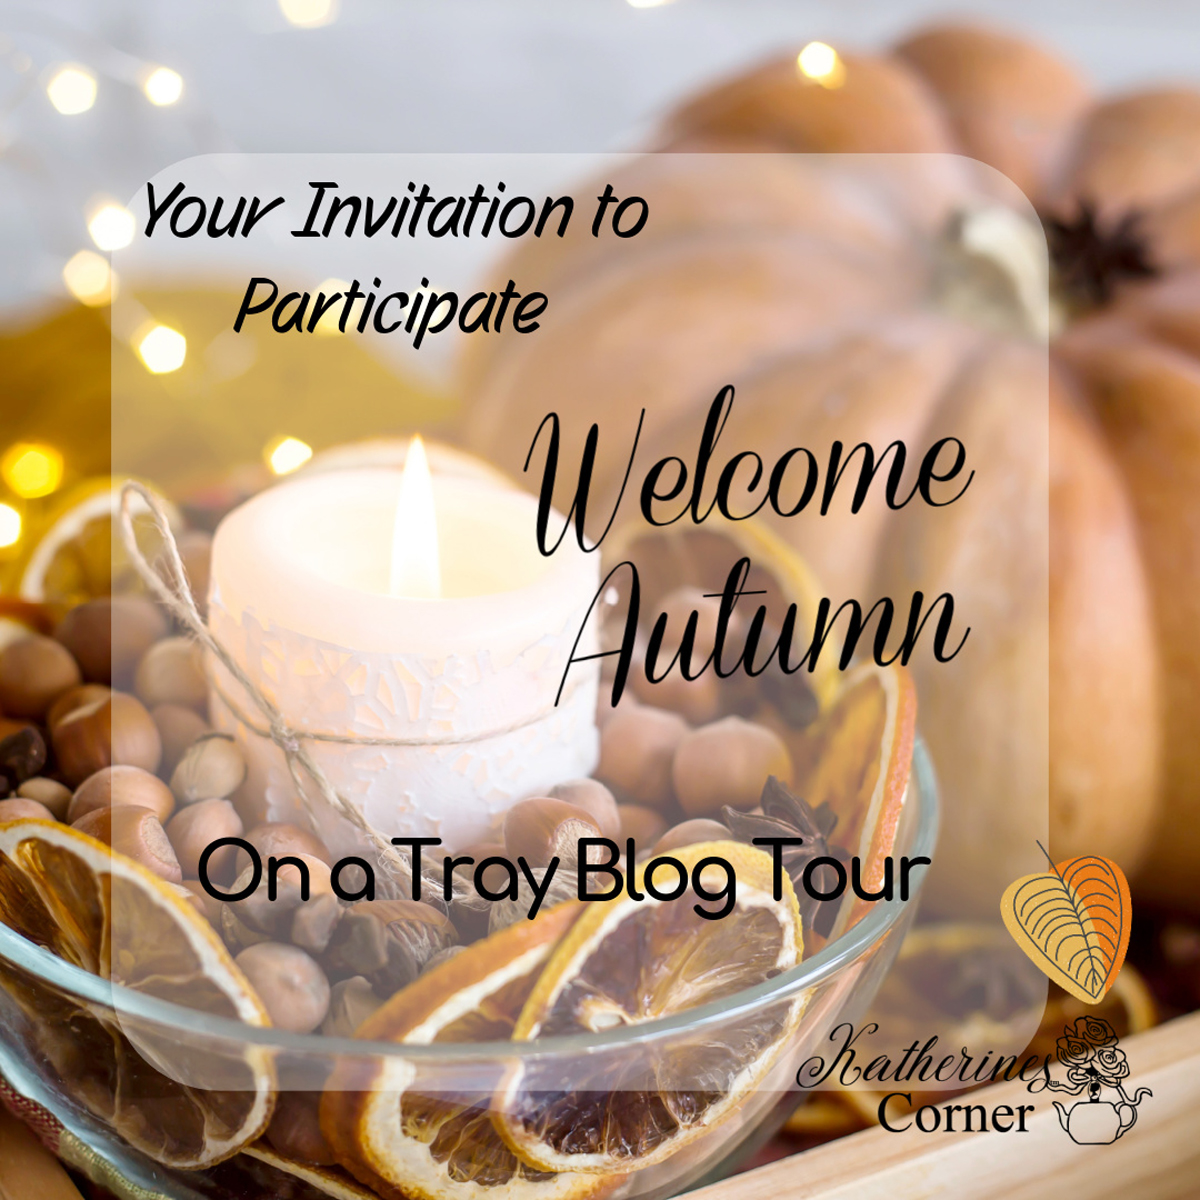 Welcome Autumn On a Tray Blog Tour Invitation